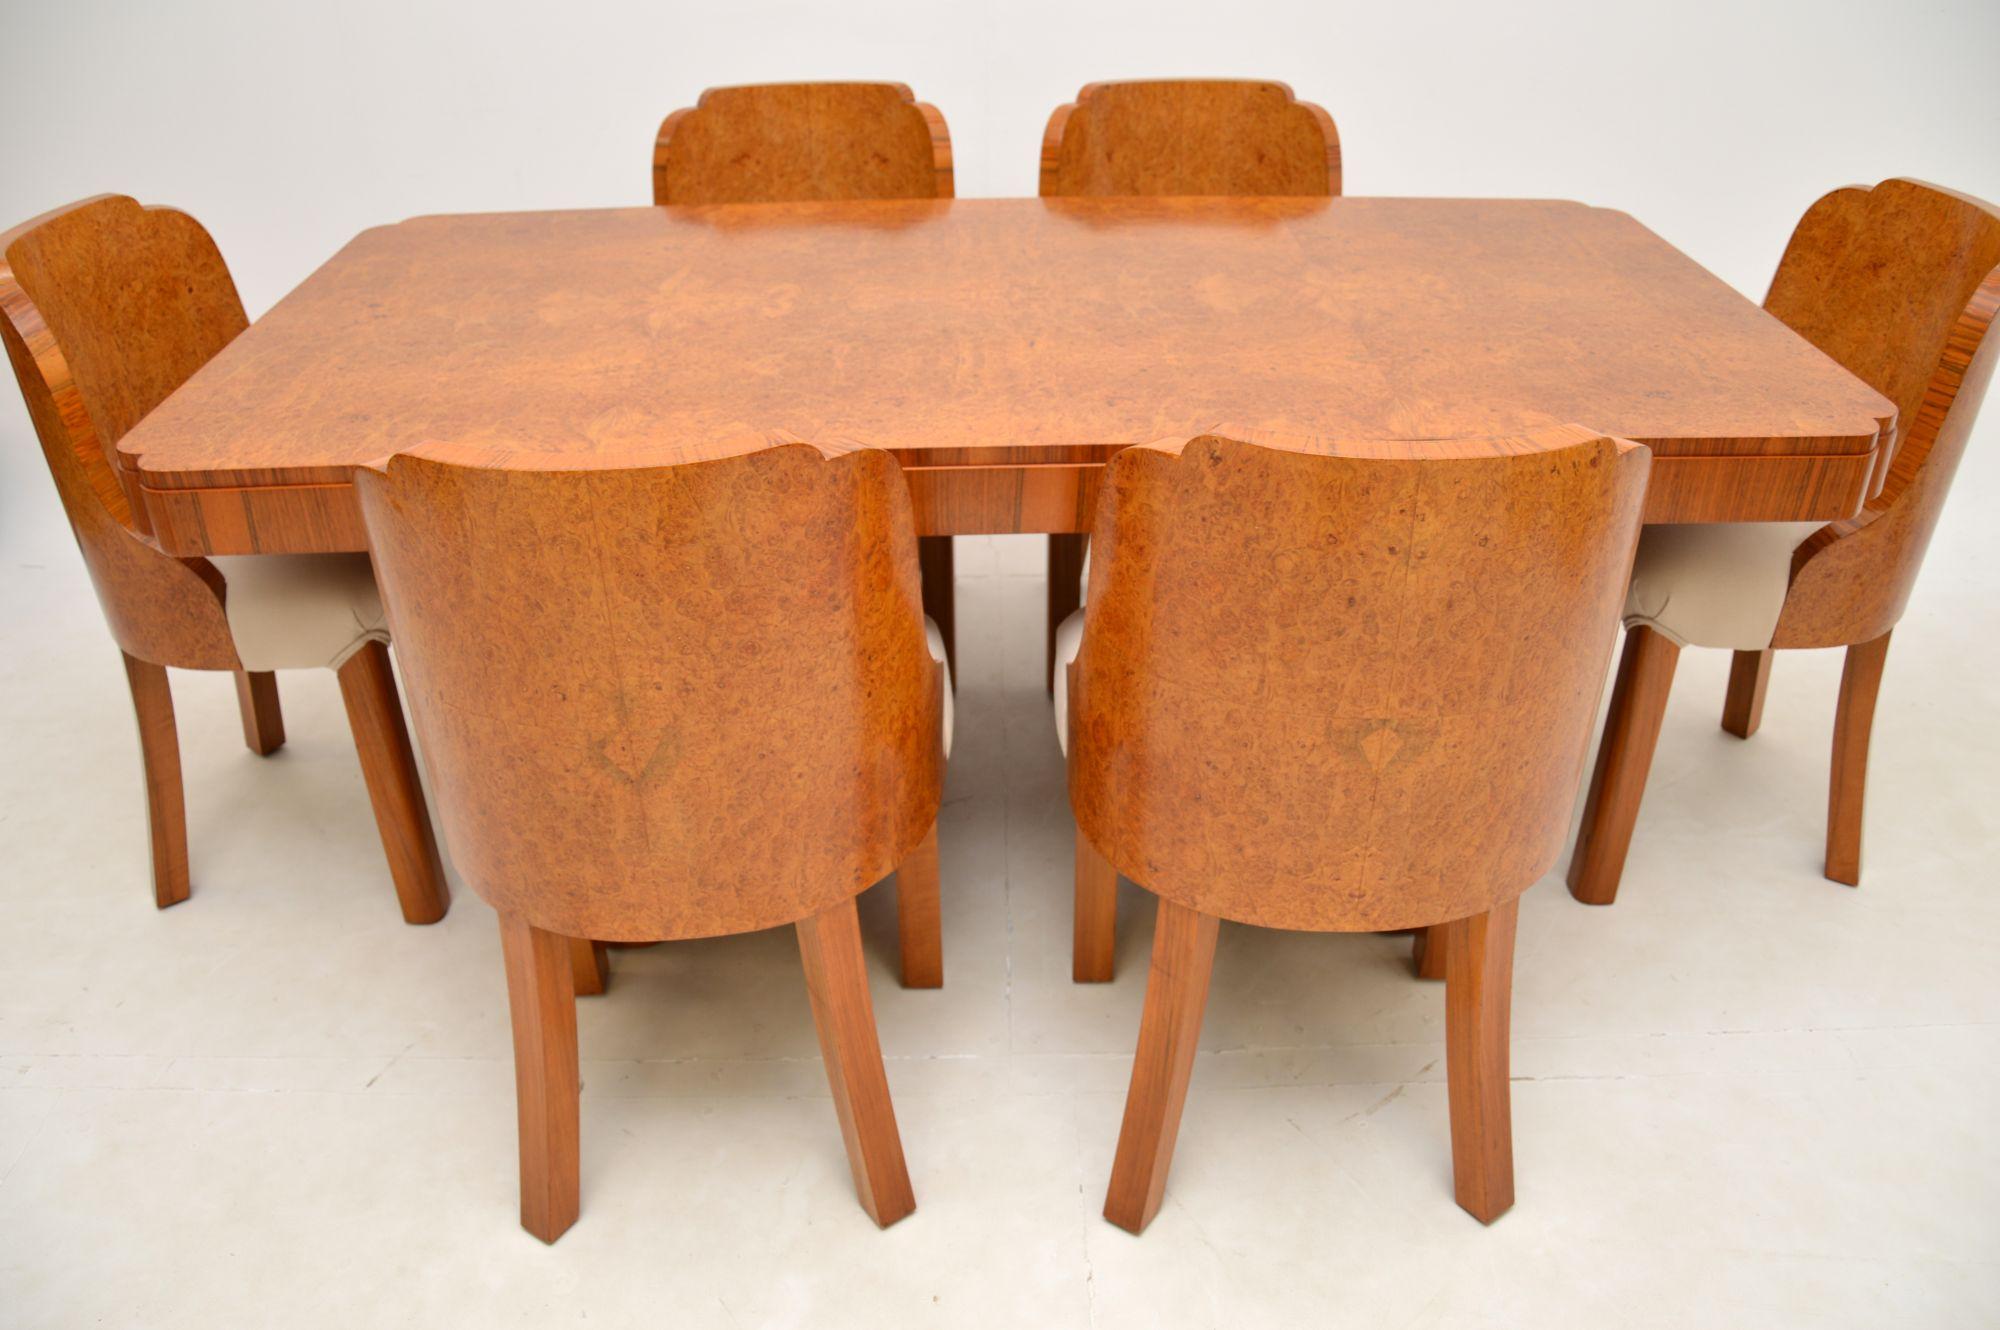 An absolutely stunning original Art Deco period cloud back dining suite in burr walnut. This was made in England, it dates from the 1920-30s.

The quality is outstanding, this is so well made and beautifully designed. The chairs have wonderful